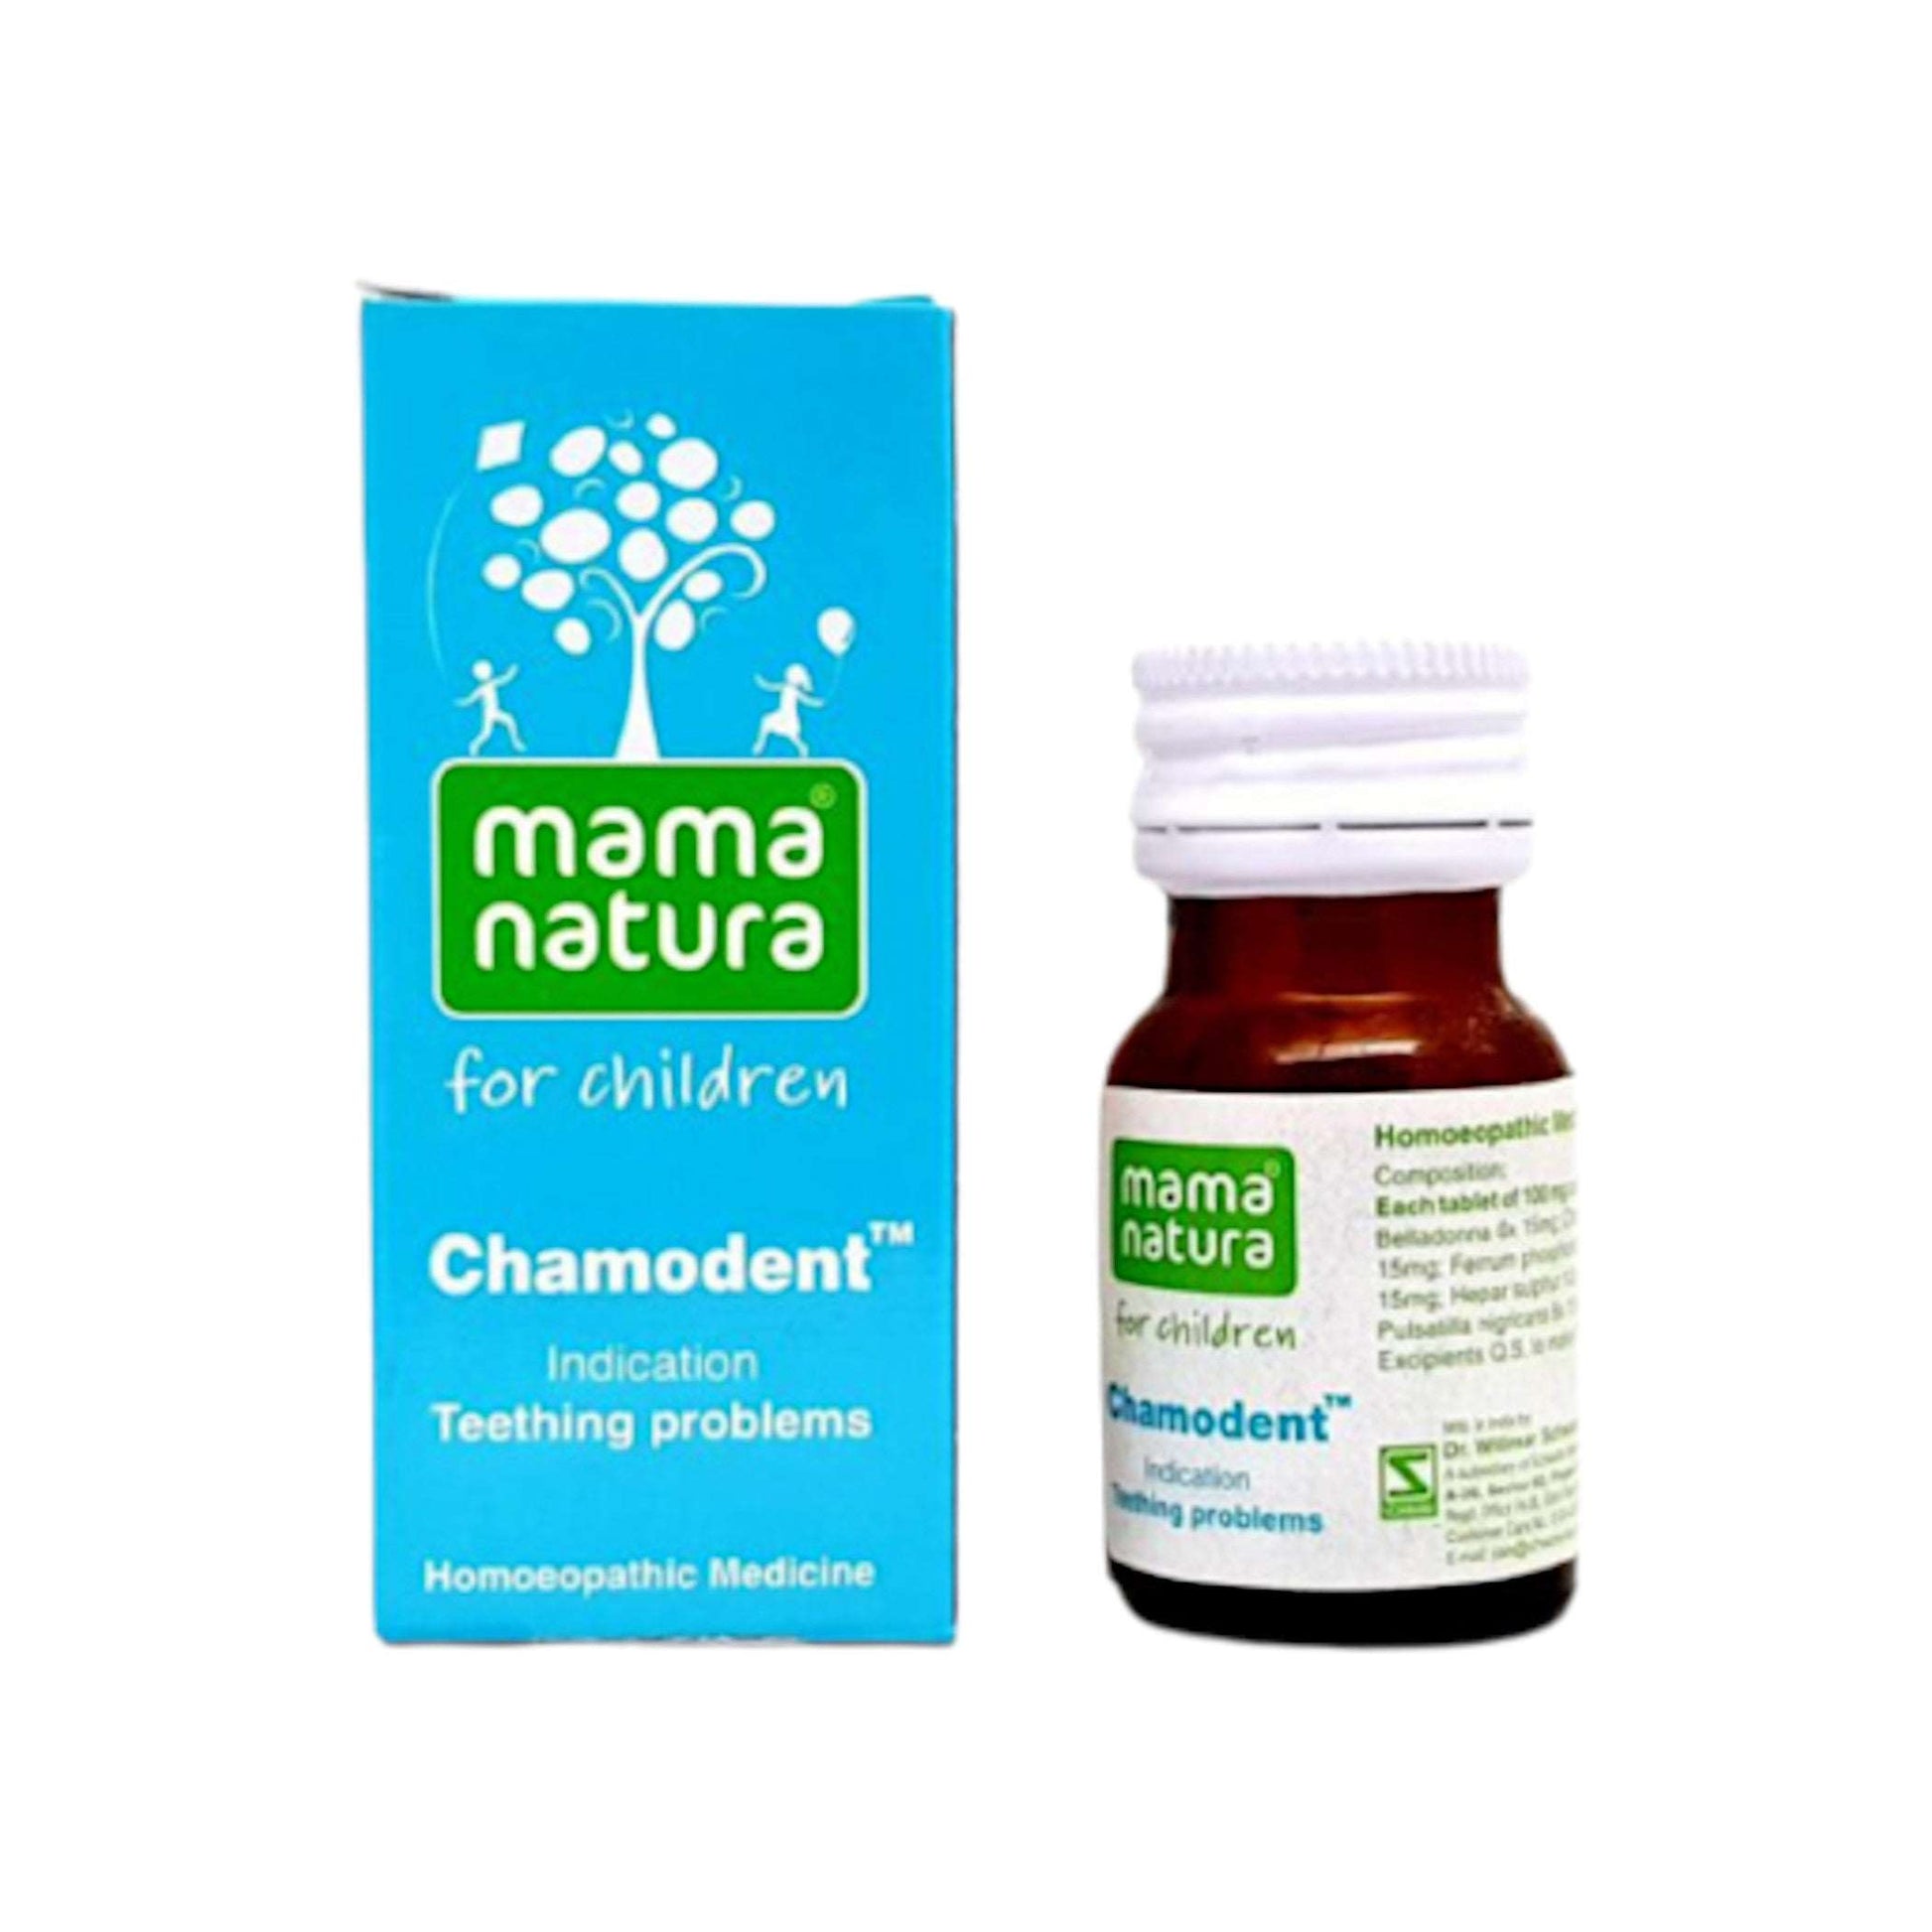 Image: Dr. Schwabe Chamodent Globules 10 g: Soothe teething-related discomfort in infants and children with homeopathic Chamomilla.